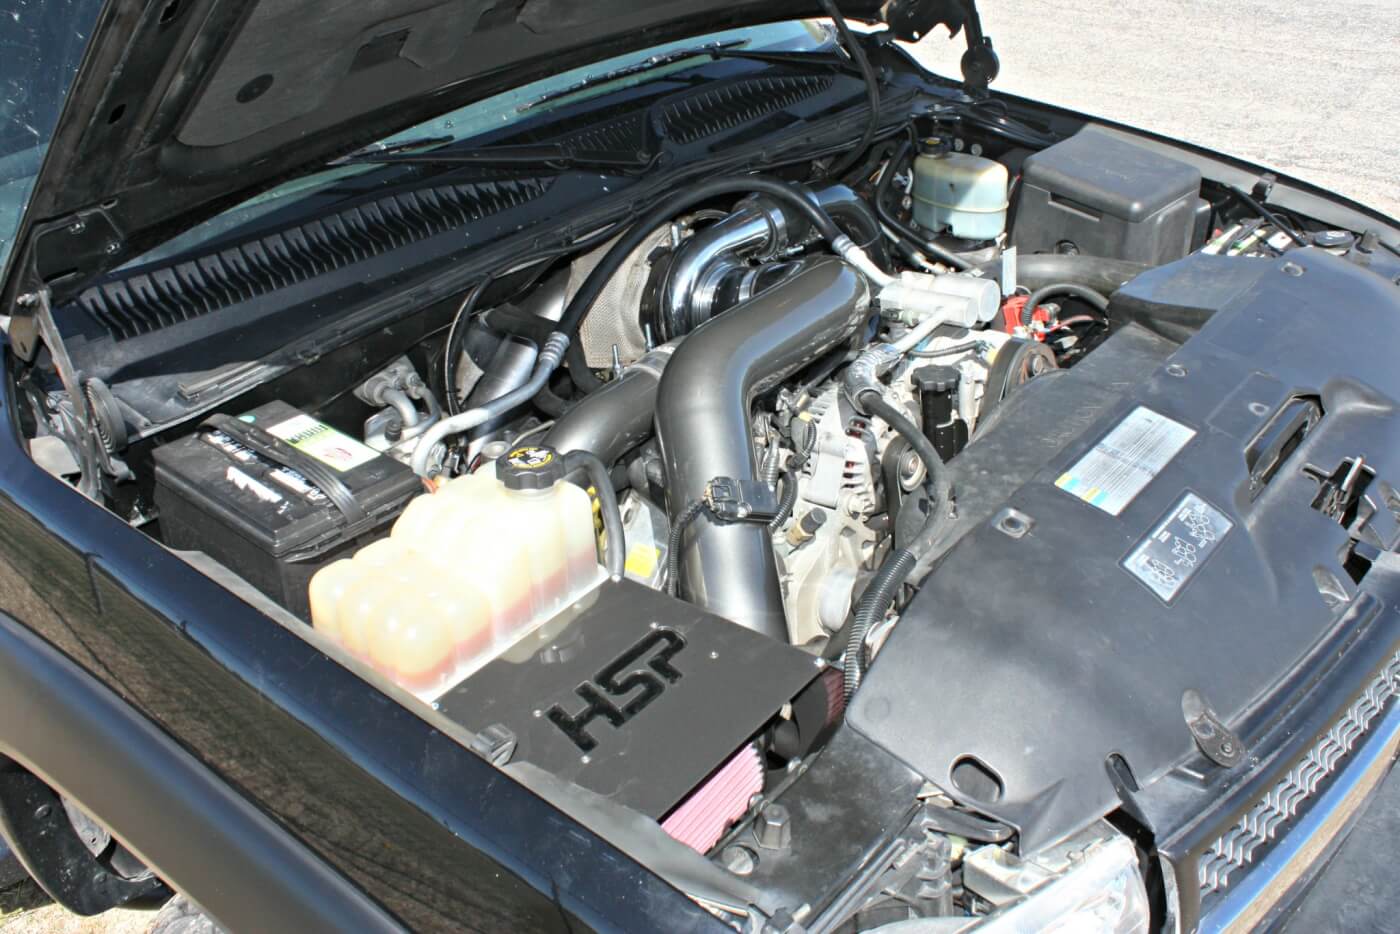 HSP Diesel S300 Turbo System, paired with a High Tech Turbo S365 FMW turbocharger, is a great upgrade to replace the stock Duramax turbo. It offers quick spool-up and enough air to support 600-plus horsepower. In addition, the mandrel-bent piping and high-flow Y-bridge improves engine efficiency and is powdercoated to really add "bling" factor under the hood.